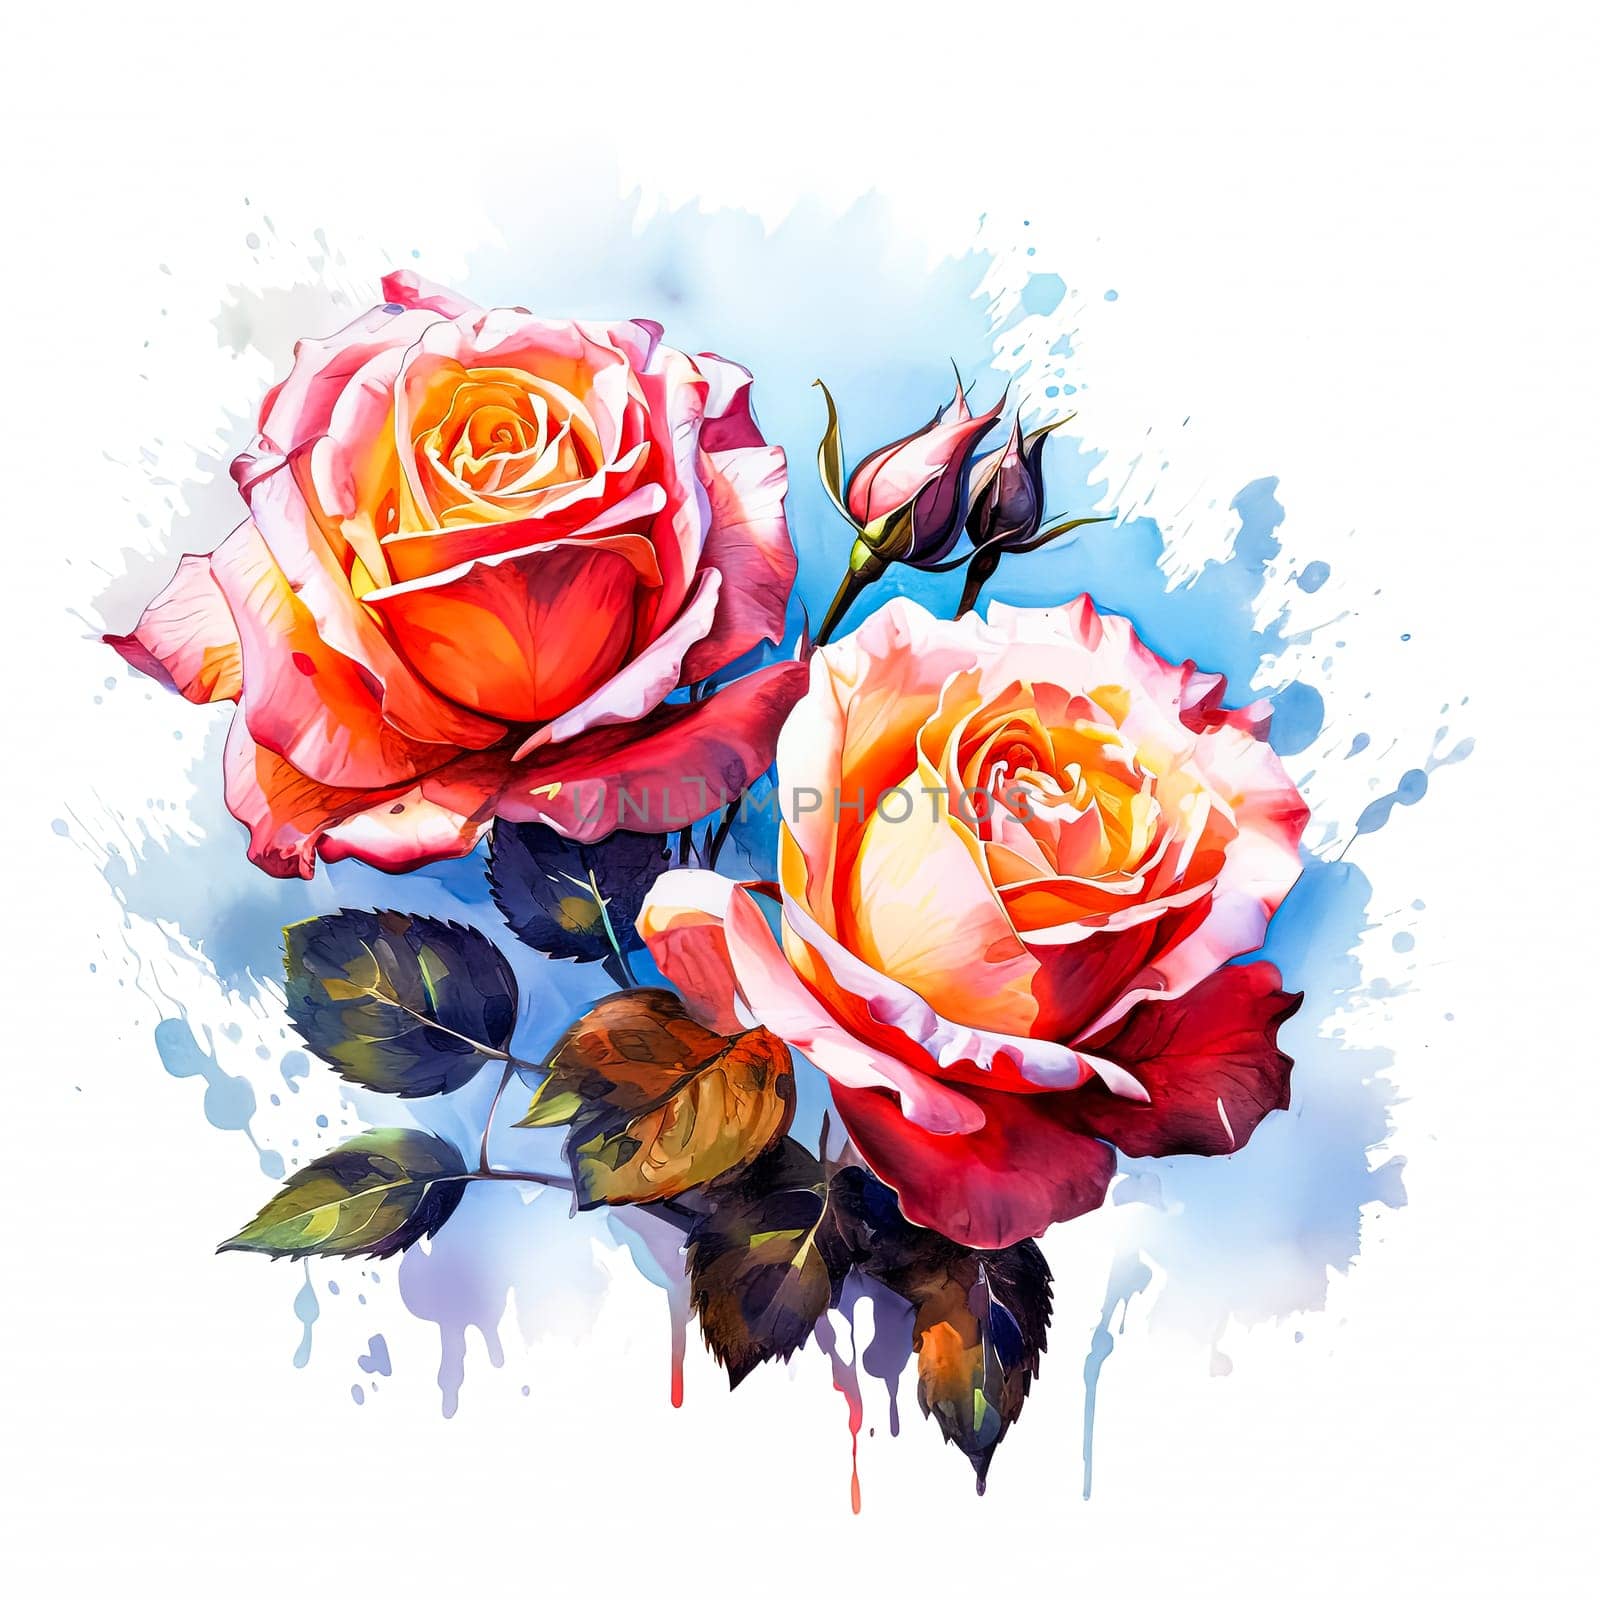 Hand drawn watercolor illustration featuring abstract botanical elements with splashes. Red rose bouquet on white background, ideal for invitations, postcards, posters.